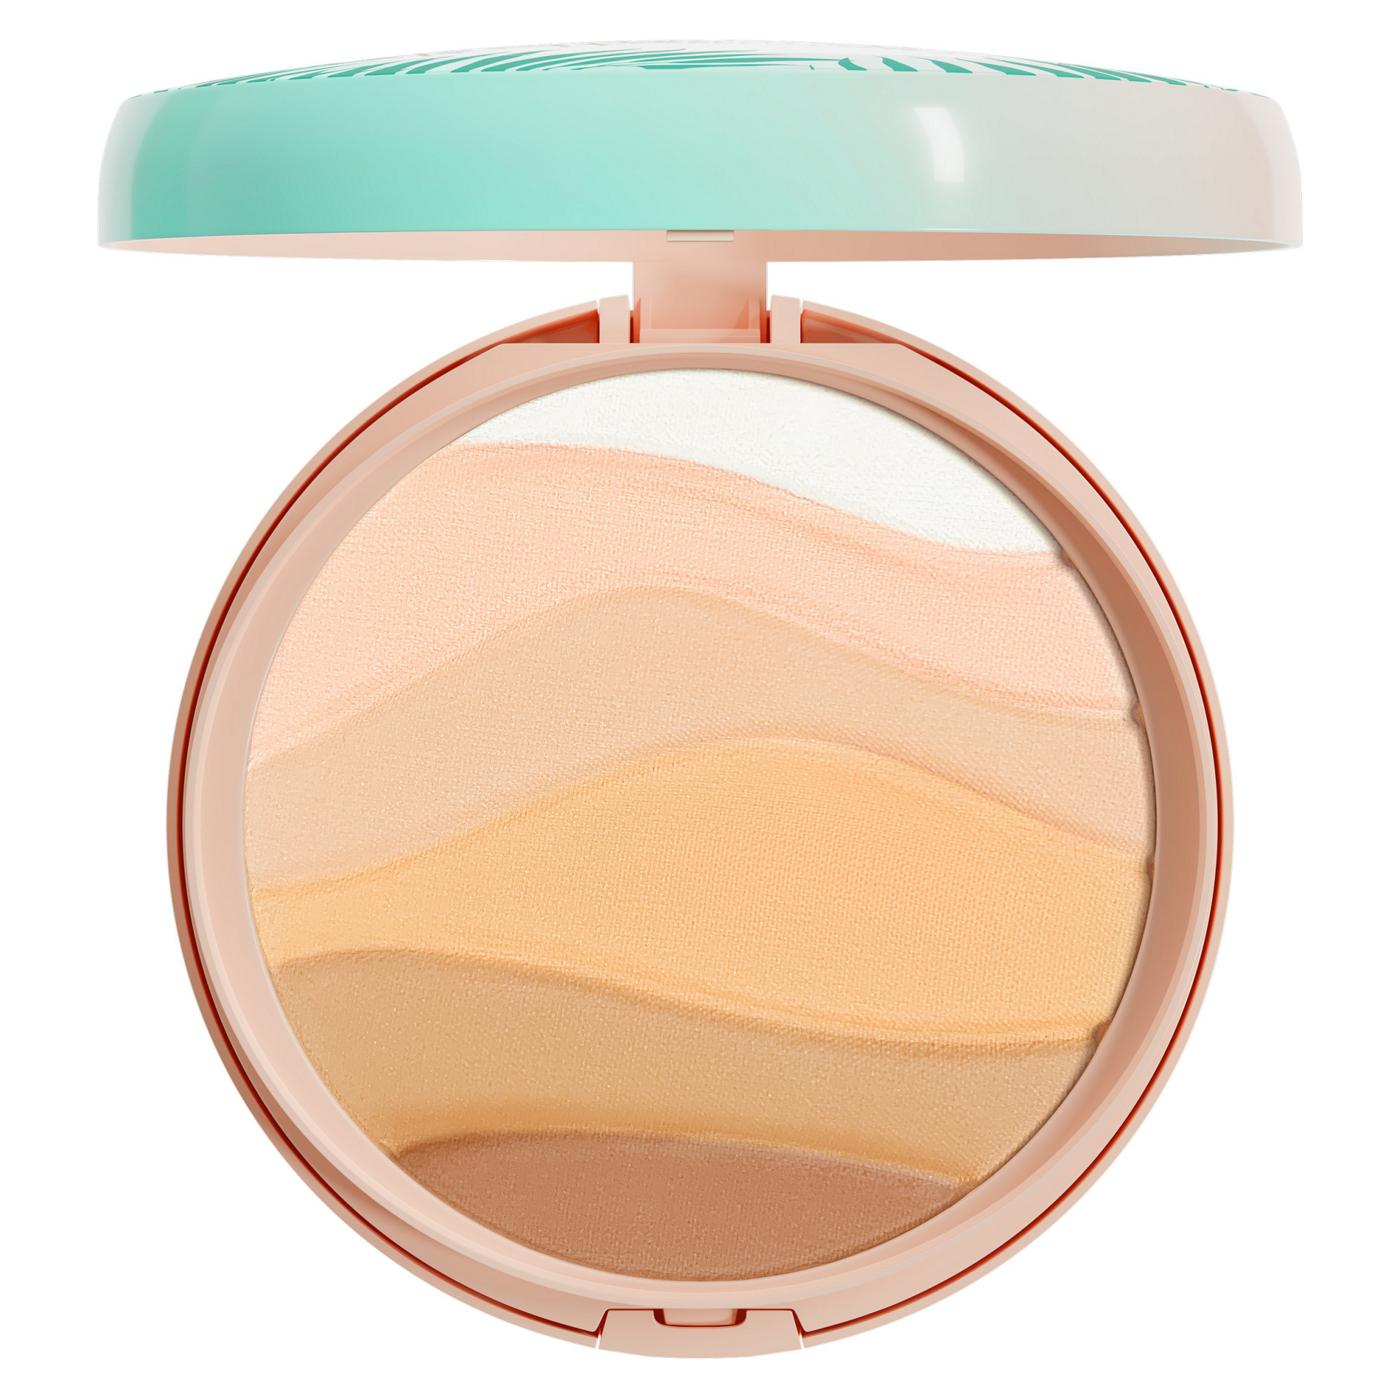 Physicians Formula Butter Believe It! Pressed Powder Translucent; image 5 of 5